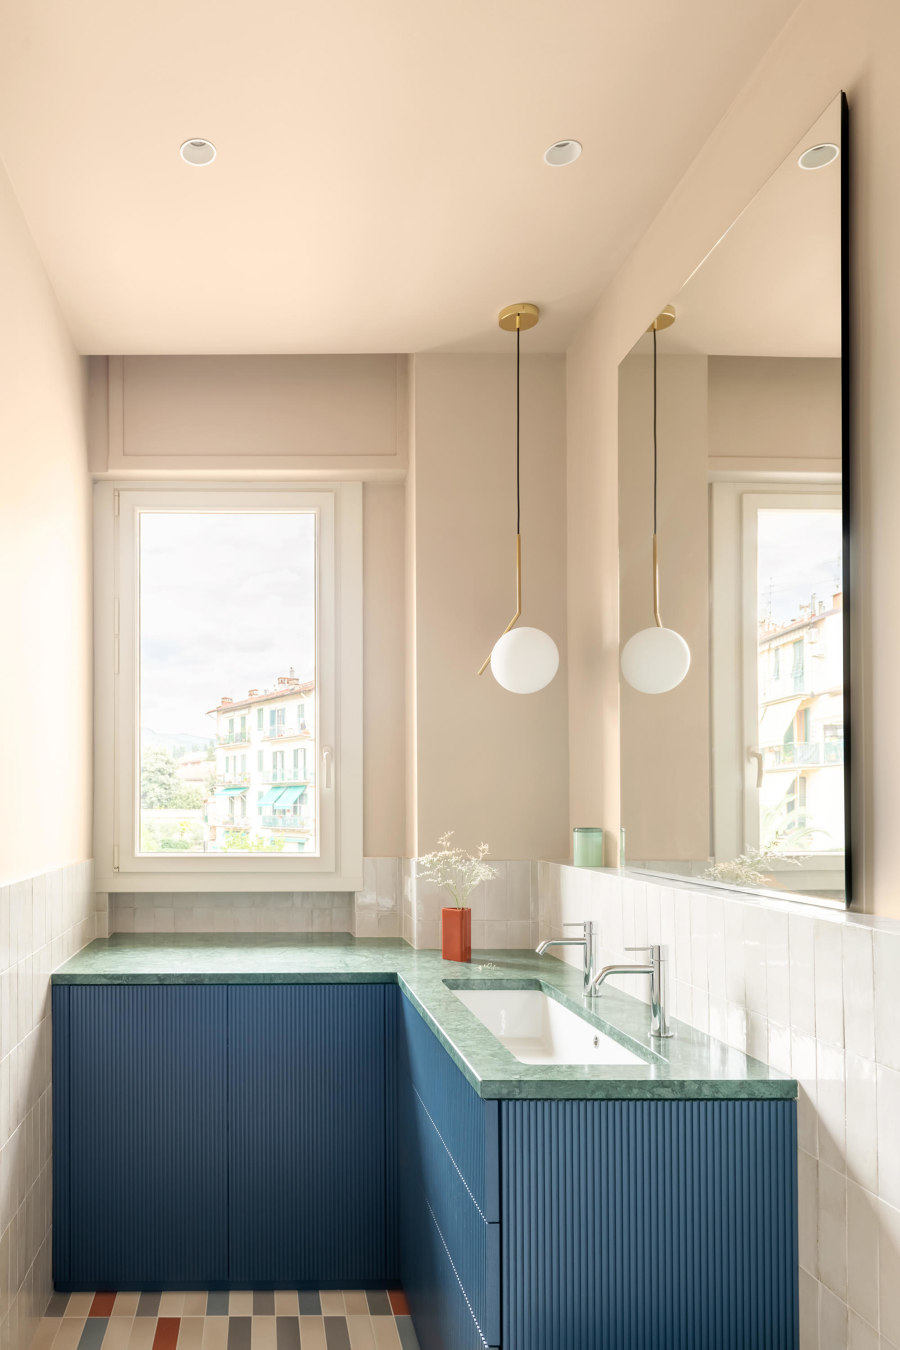 Top ten: curated bathrooms with wood surfaces | News